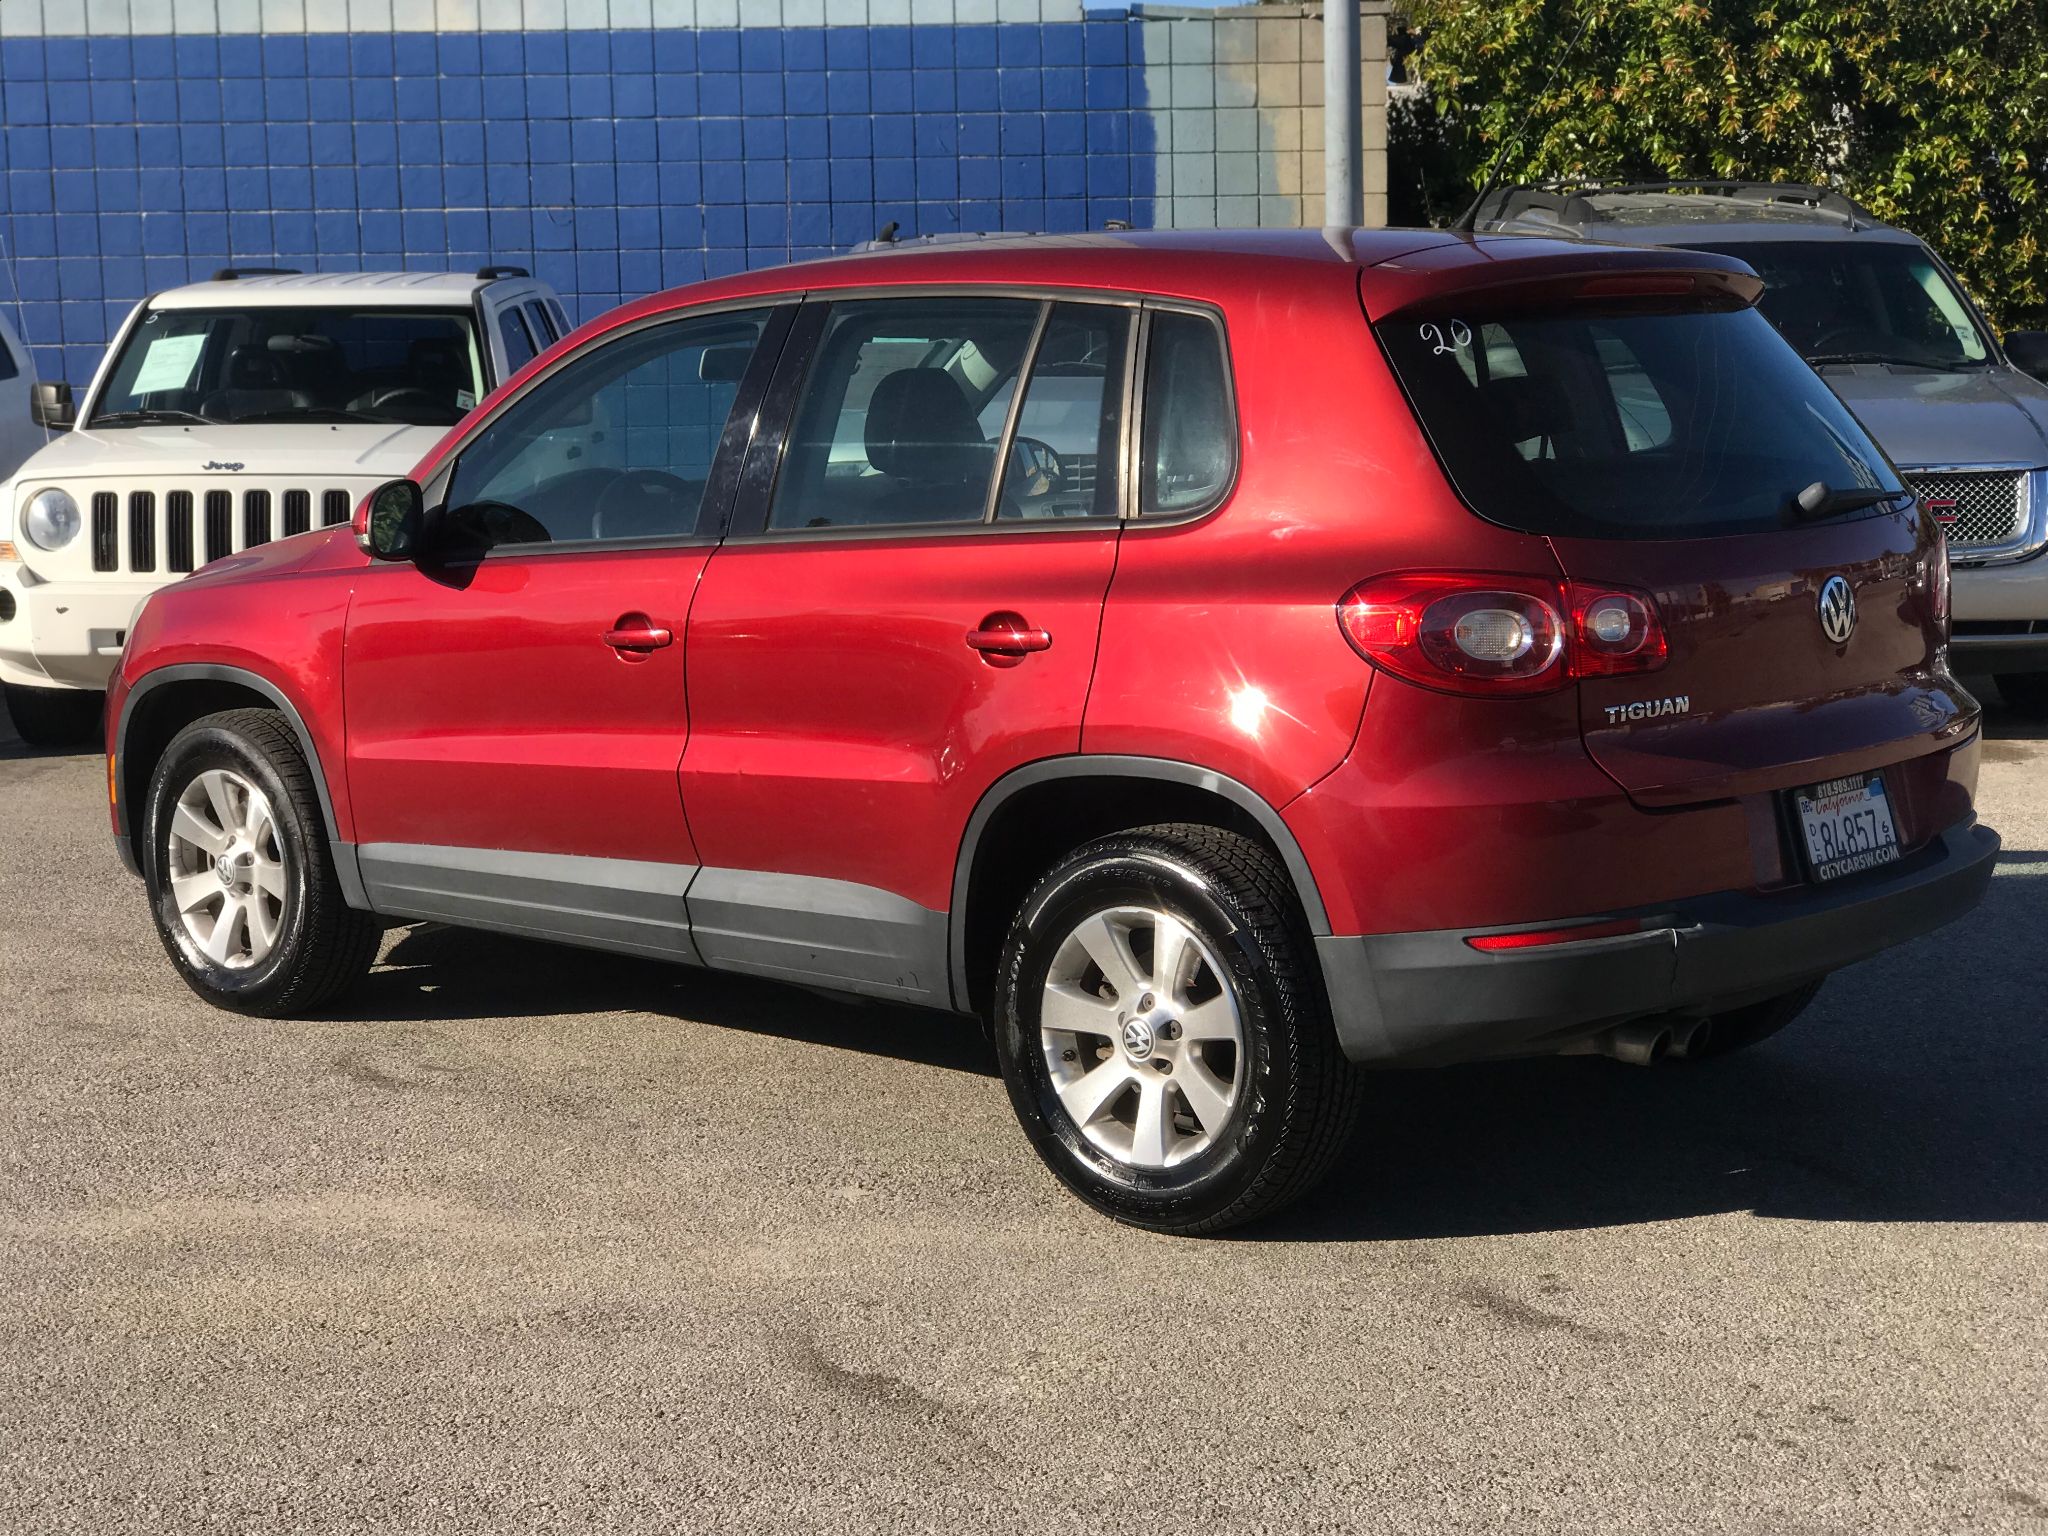 Used 2009 Volkswagen Tiguan S at City Cars Warehouse INC